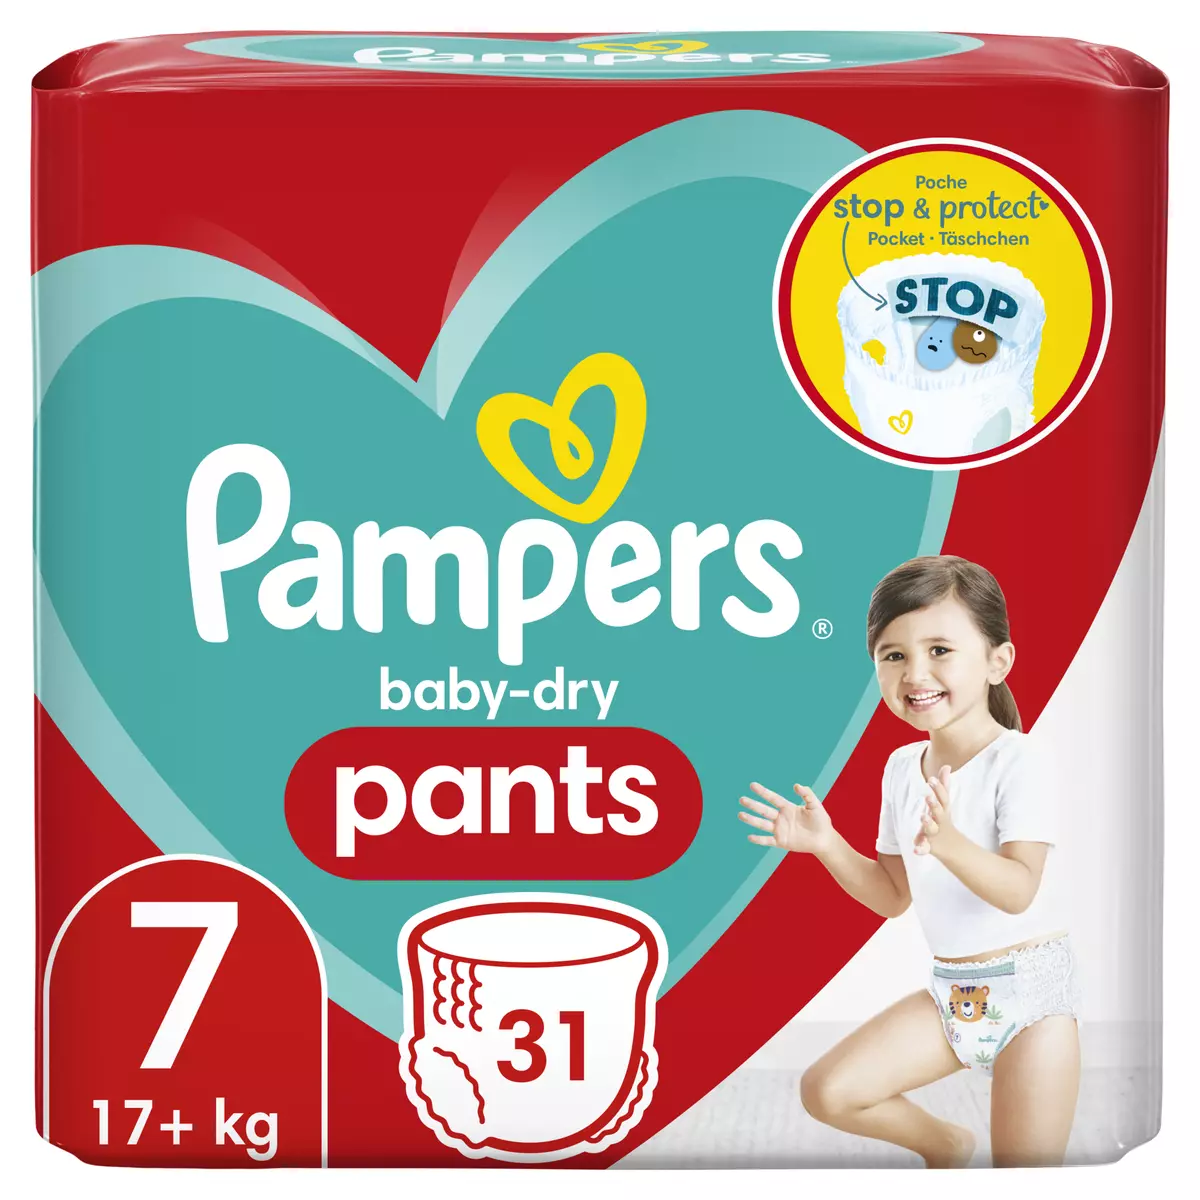 PAMPERS Baby-dry pants couches culottes taille 7 (+17kg) 31 couches culottes  pas cher 